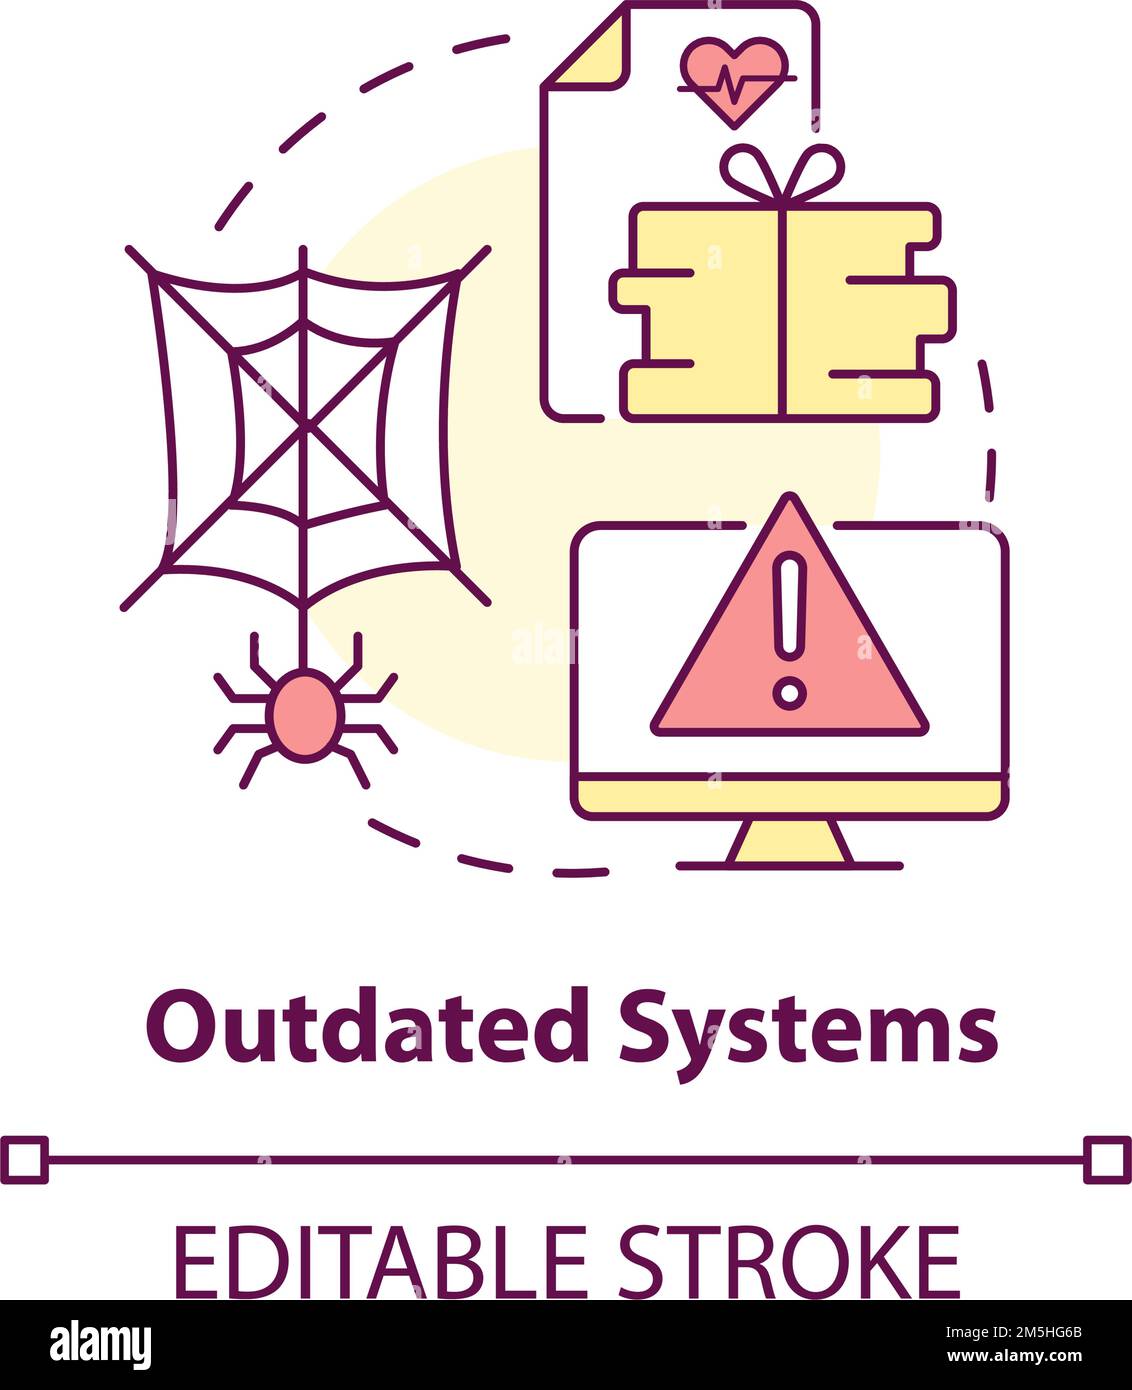 Outdated systems concept icon Stock Vector